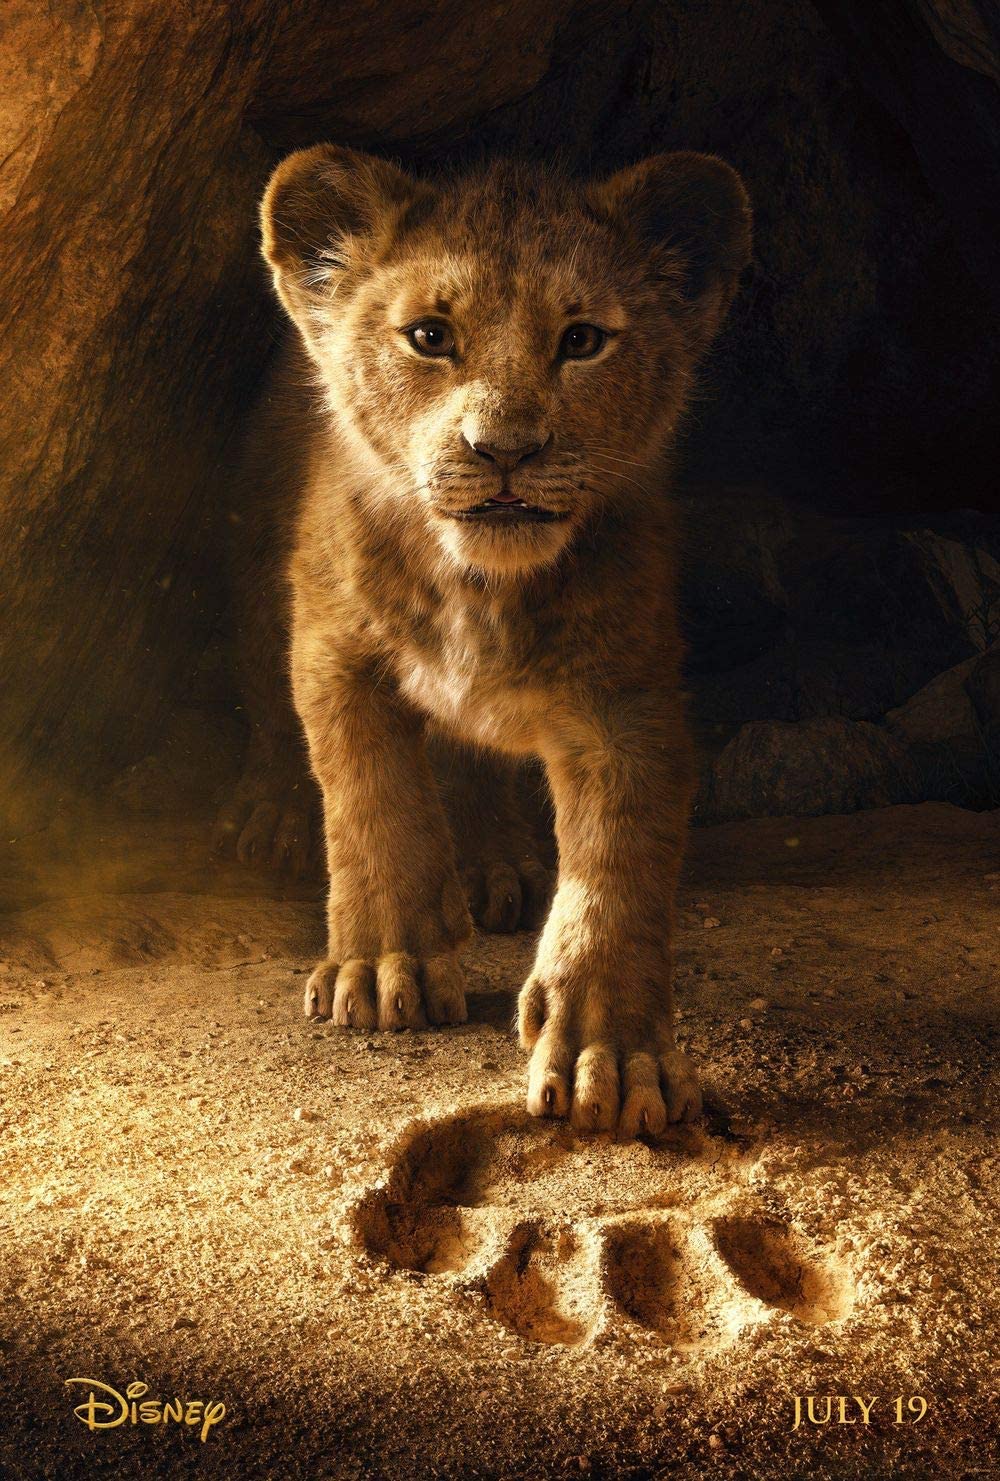 The Lion King 2019 Movie Wallpapers